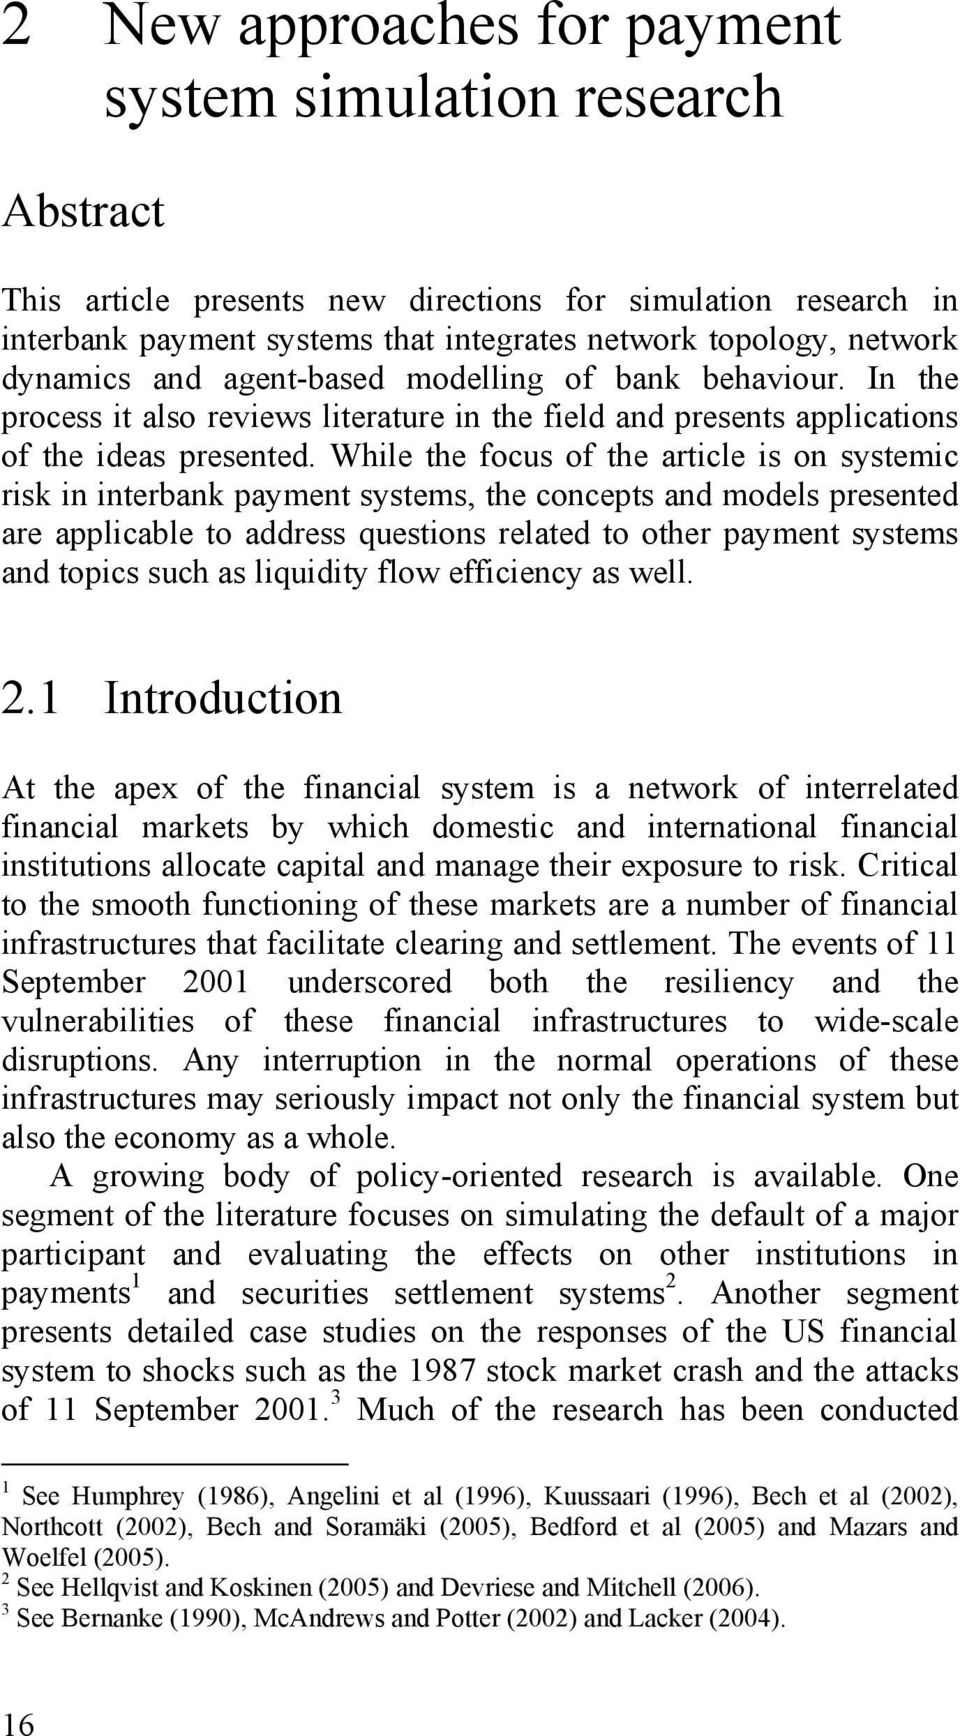 While the focus of the article is on systemic risk in interbank payment systems, the concepts and models presented are applicable to address questions related to other payment systems and topics such